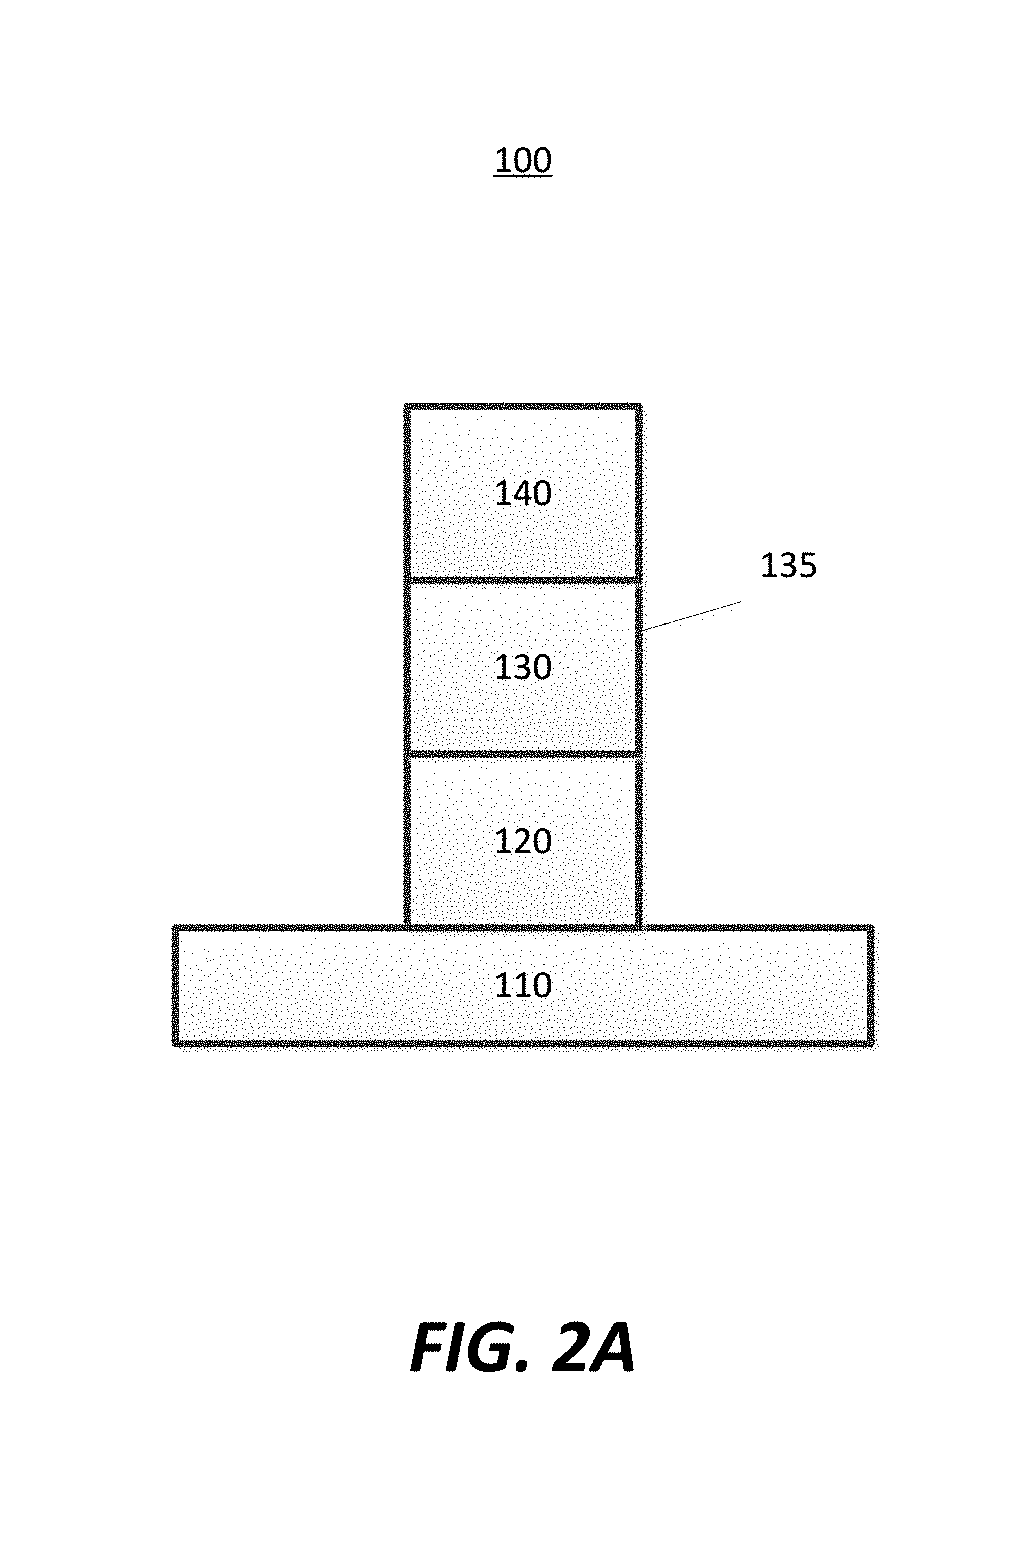 Selective film deposition method to form air gaps